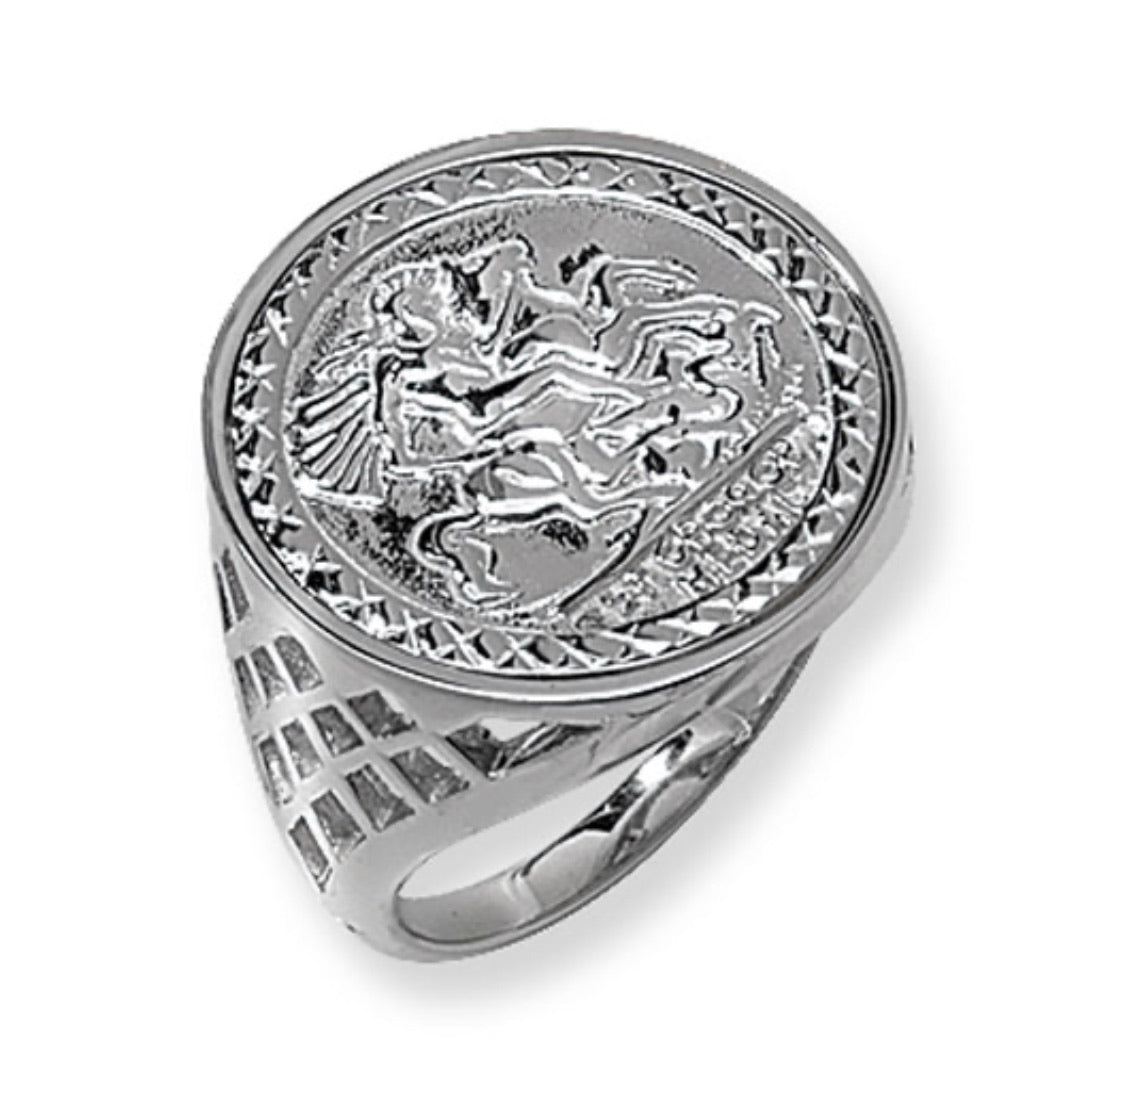 St George basket cage silver coin ring